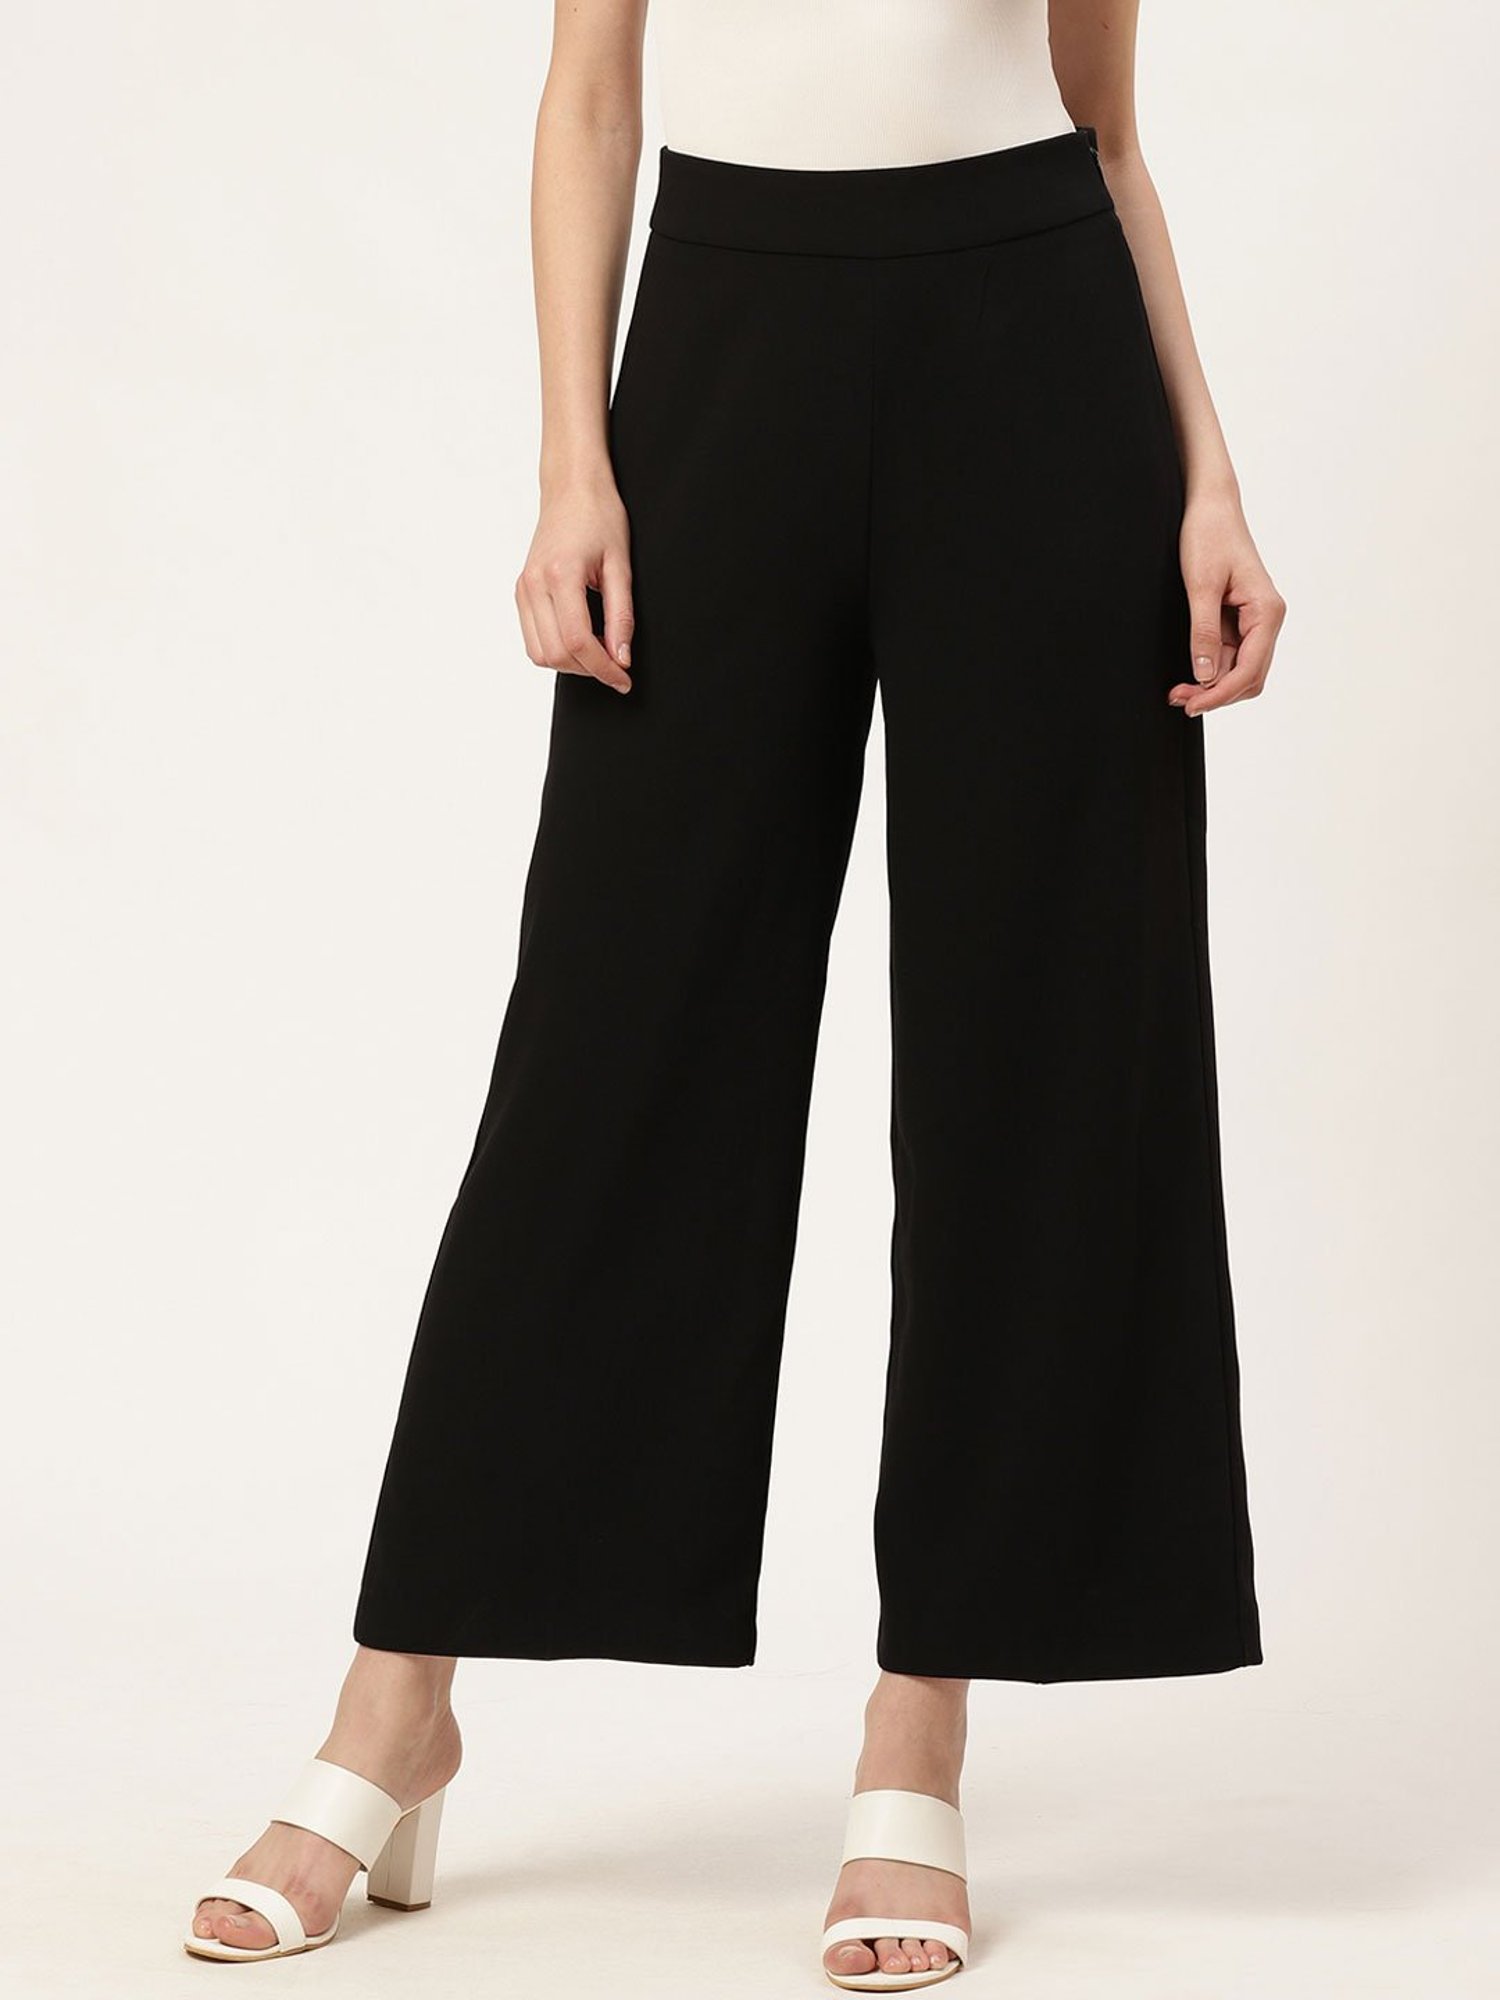 FableStreet Bottoms Pants and Trousers  Buy FableStreet Black High Waist  Pants Online  Nykaa Fashion